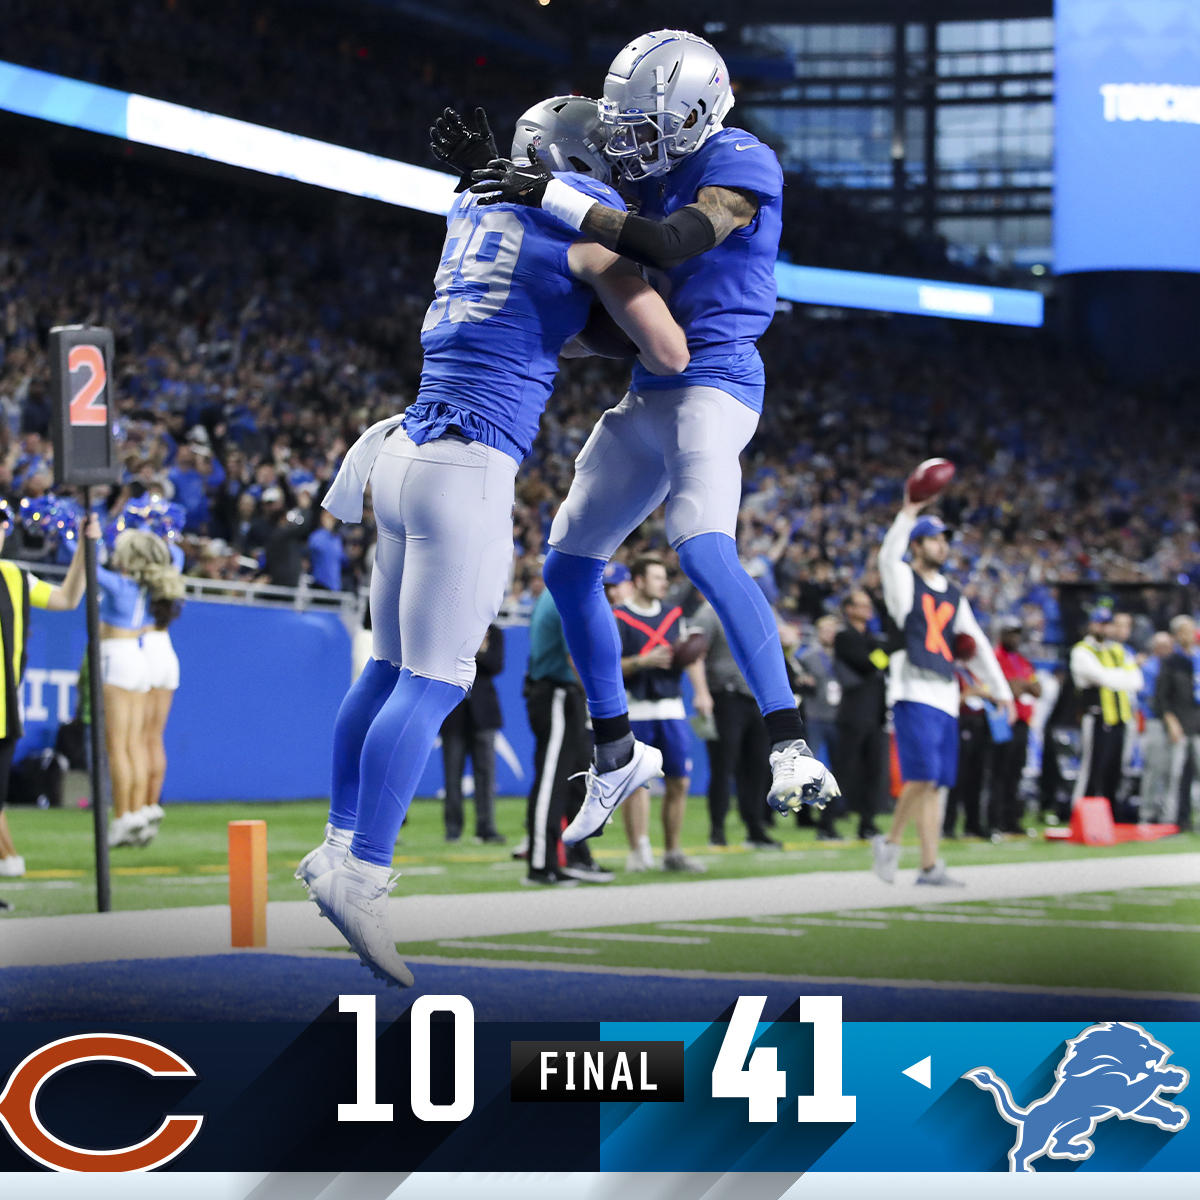 FINAL: Big day on the ground for the @Lions! #CHIvsDET